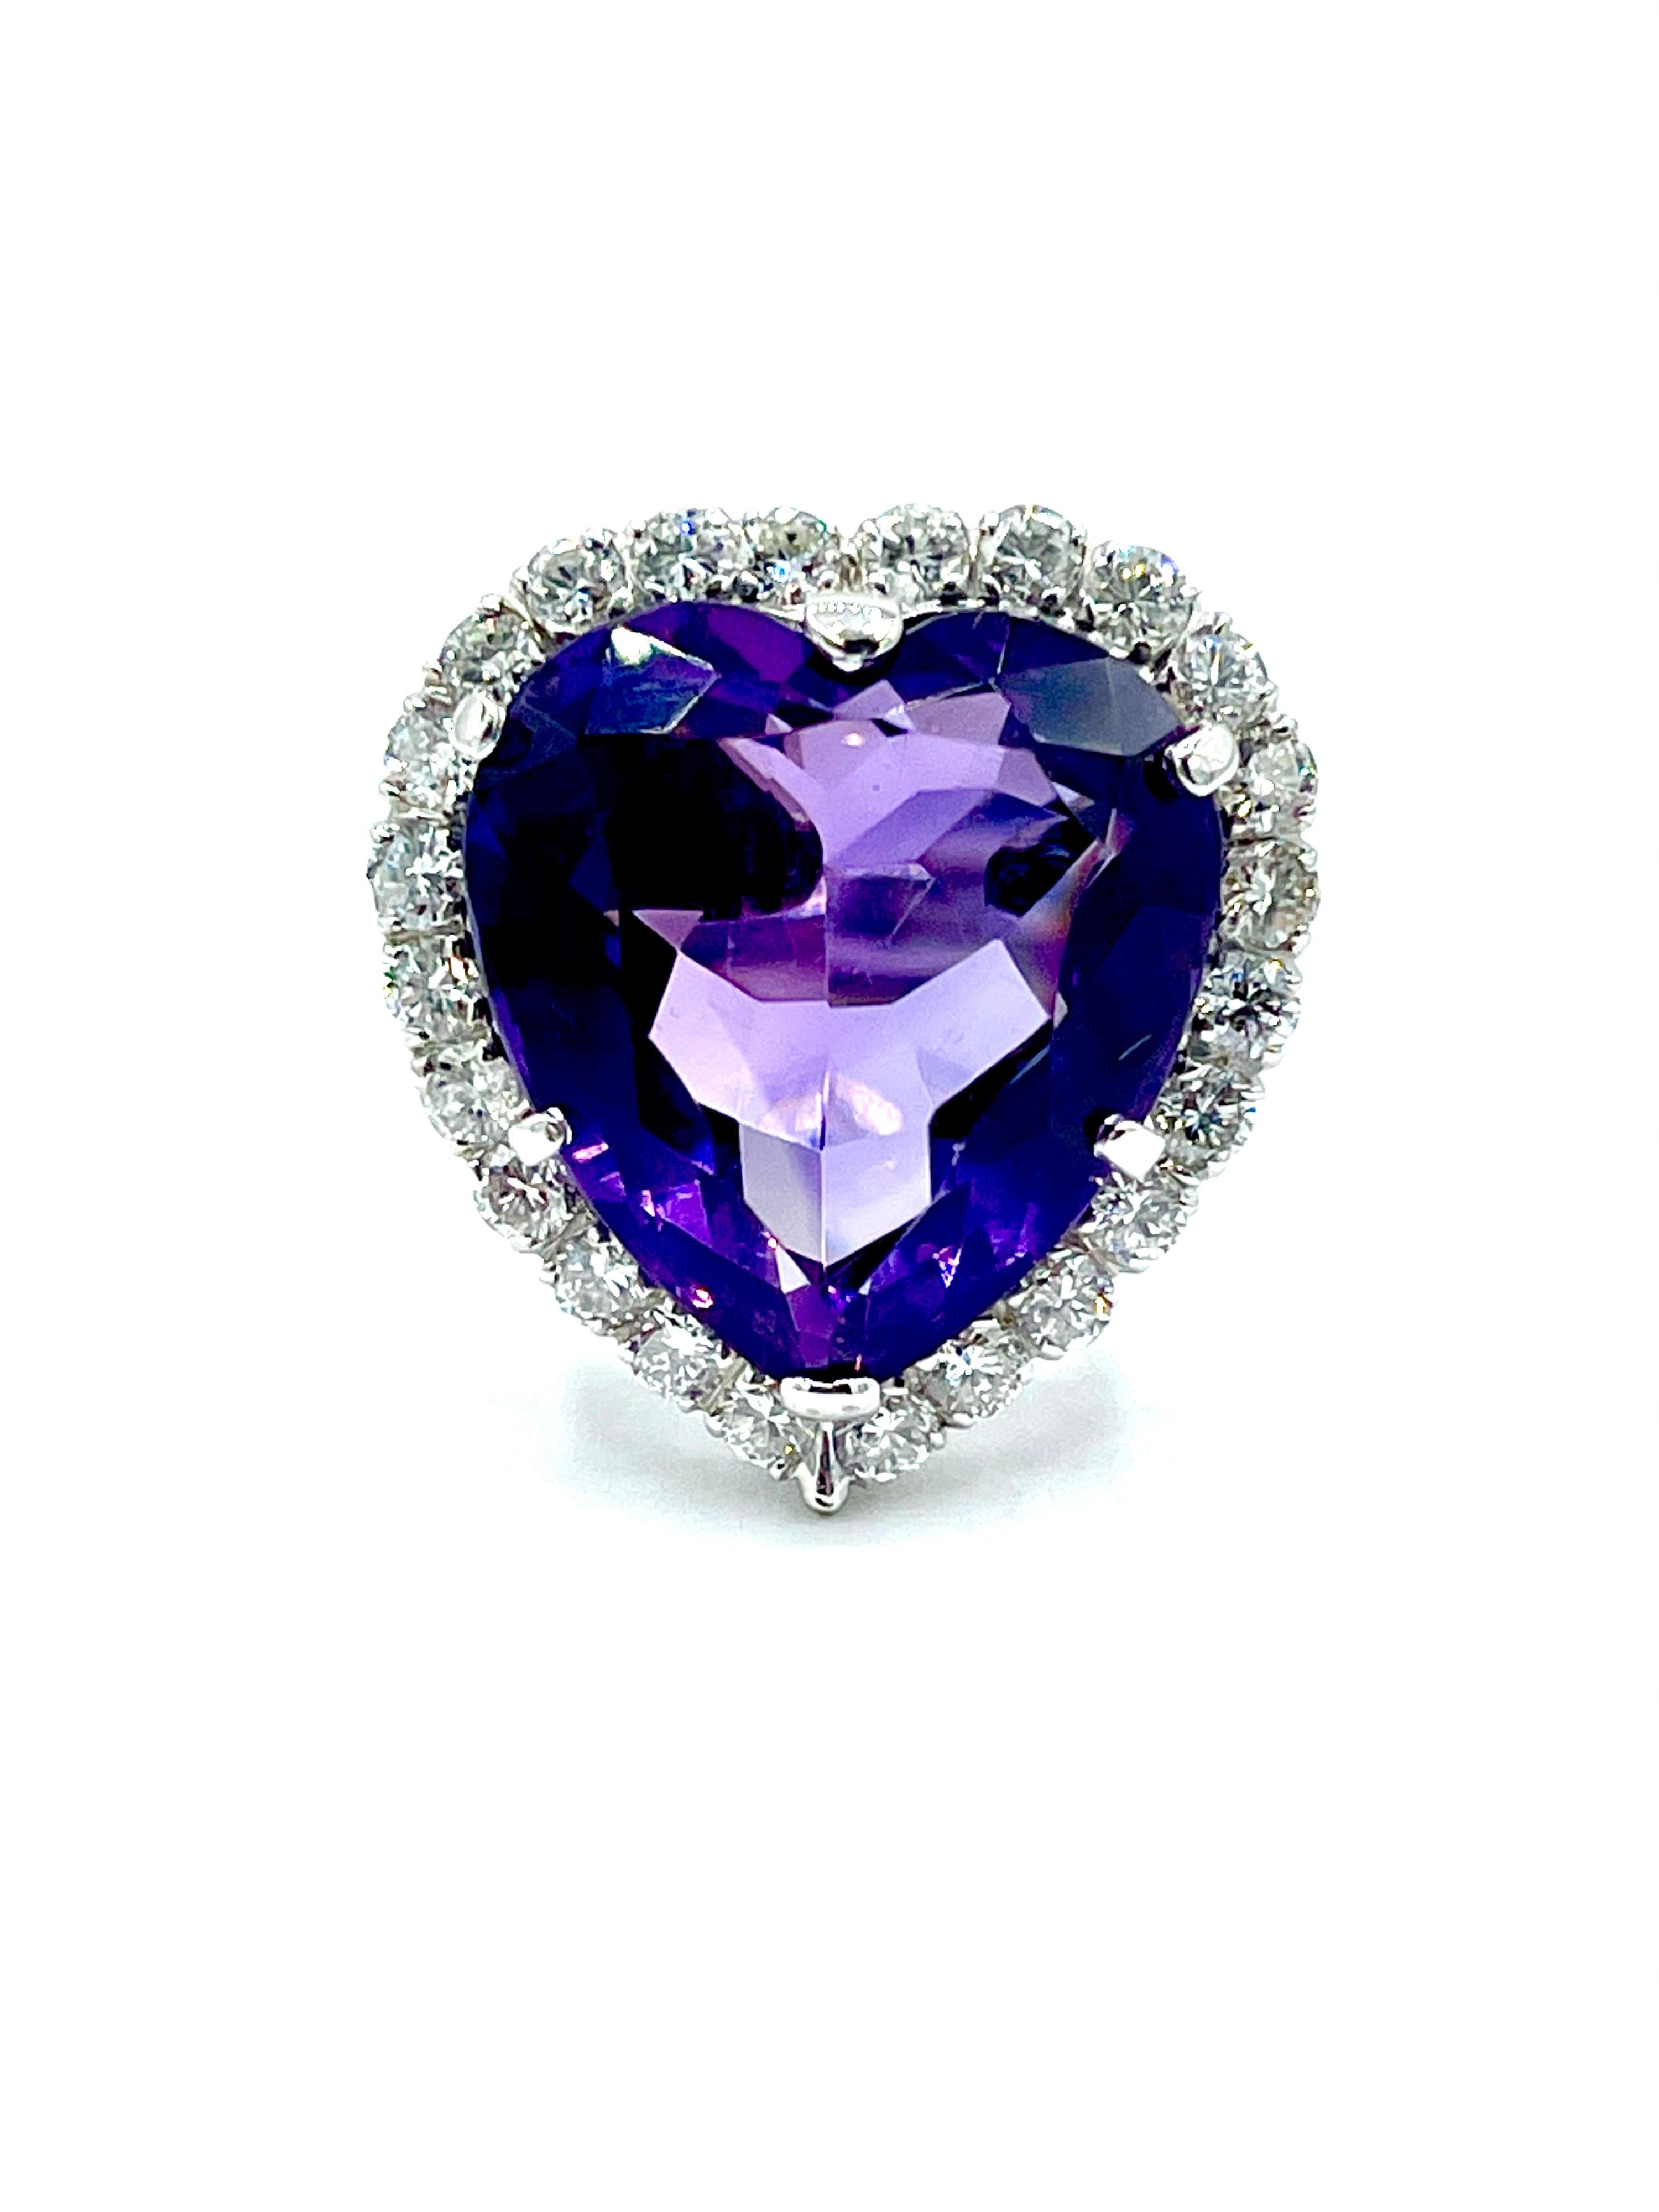 A gorgeous 12.88 carat heart shape Amethyst and round brilliant Diamond 18k white gold cocktail ring.  The Amethyst is set with six prongs, surrounded by a single row of Diamonds totaling 1.20 carats.  The Diamonds are graded as G-H color, VS